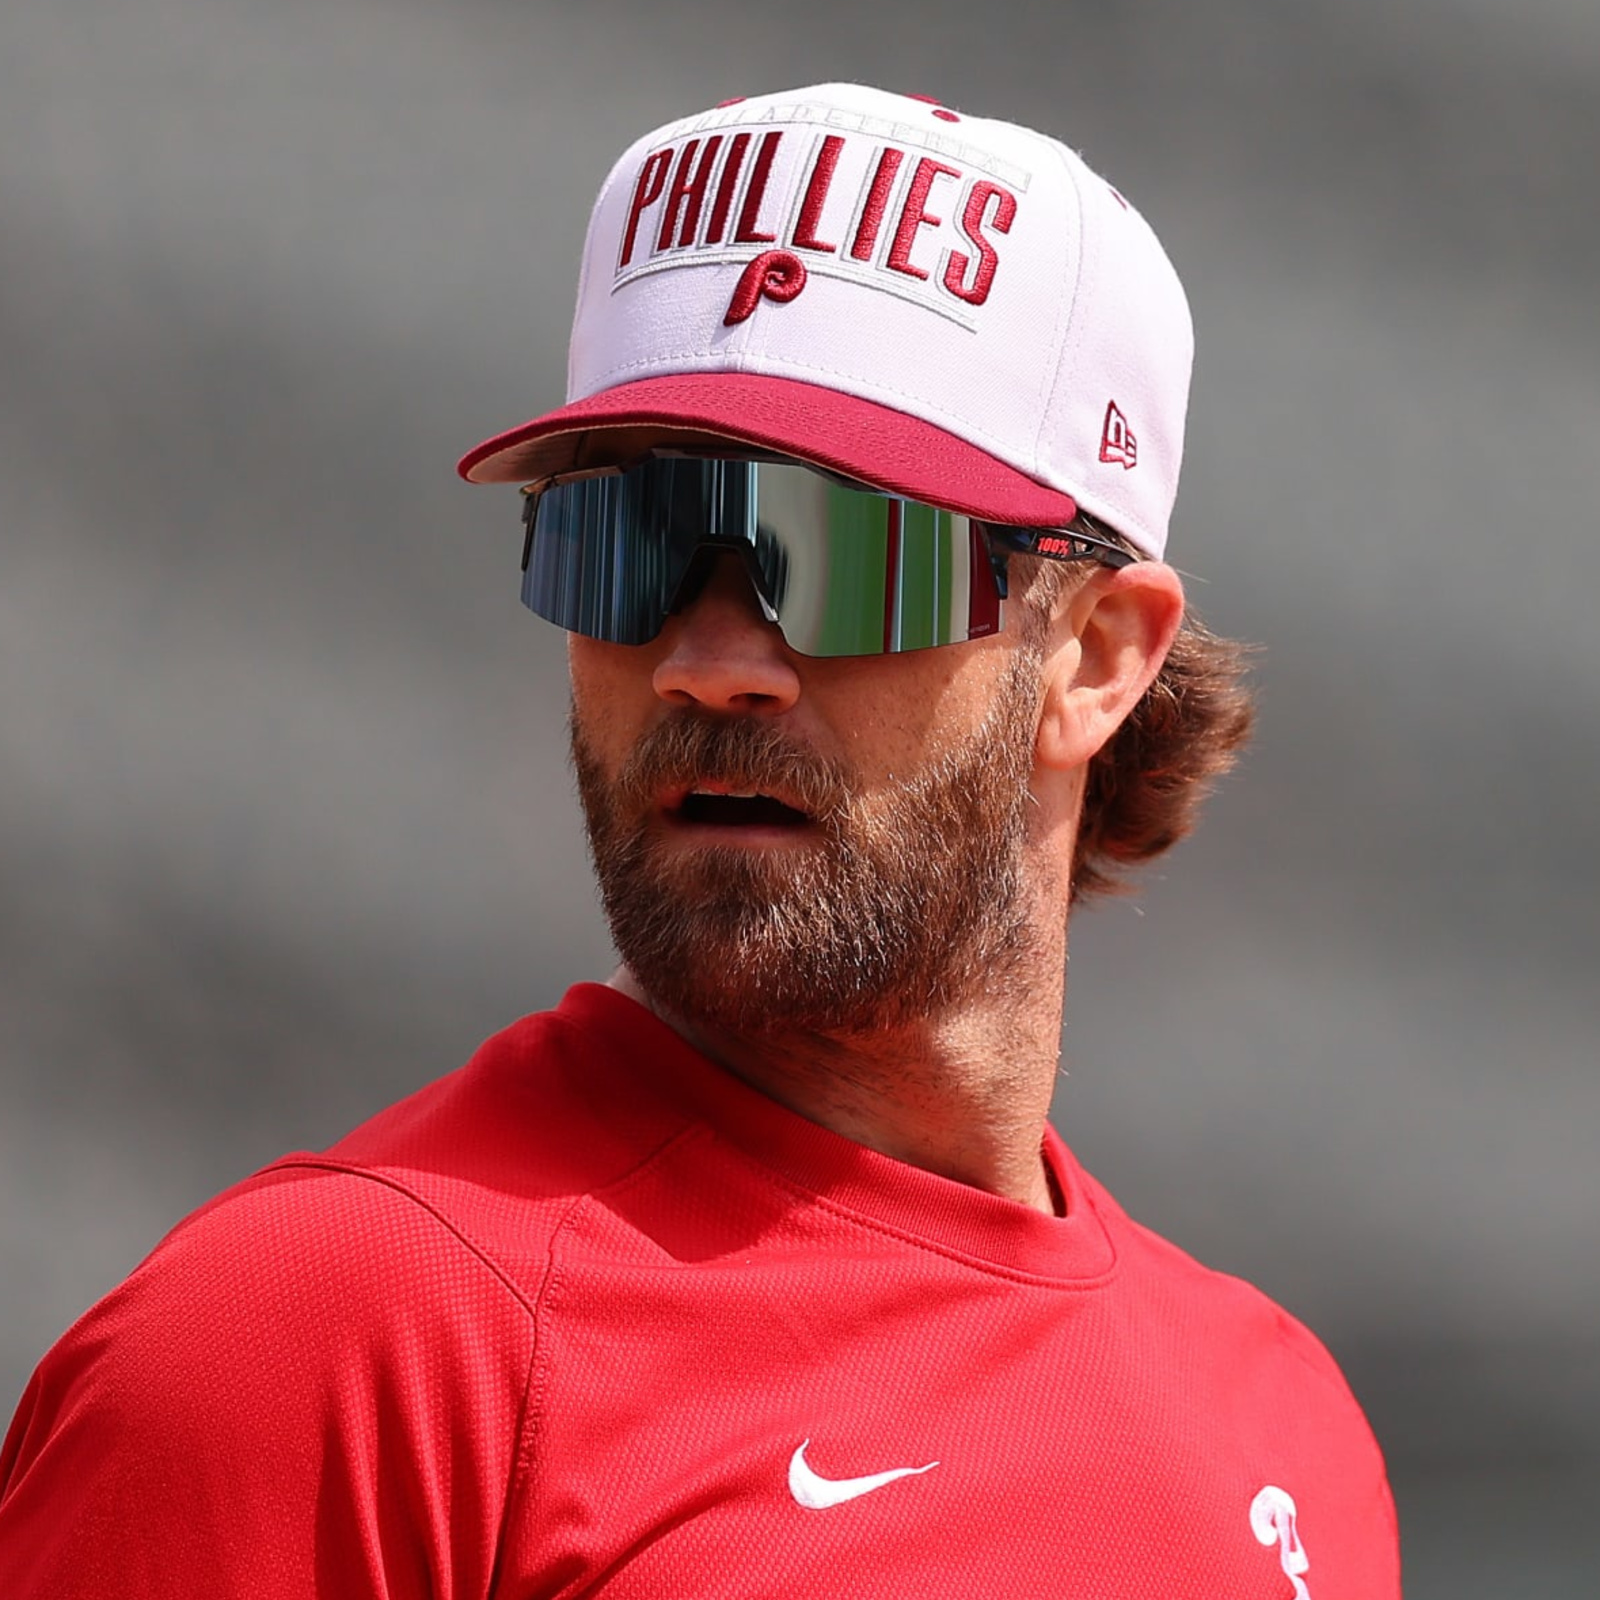 Report: Phillies' Bryce Harper Set to Return from Injury amid